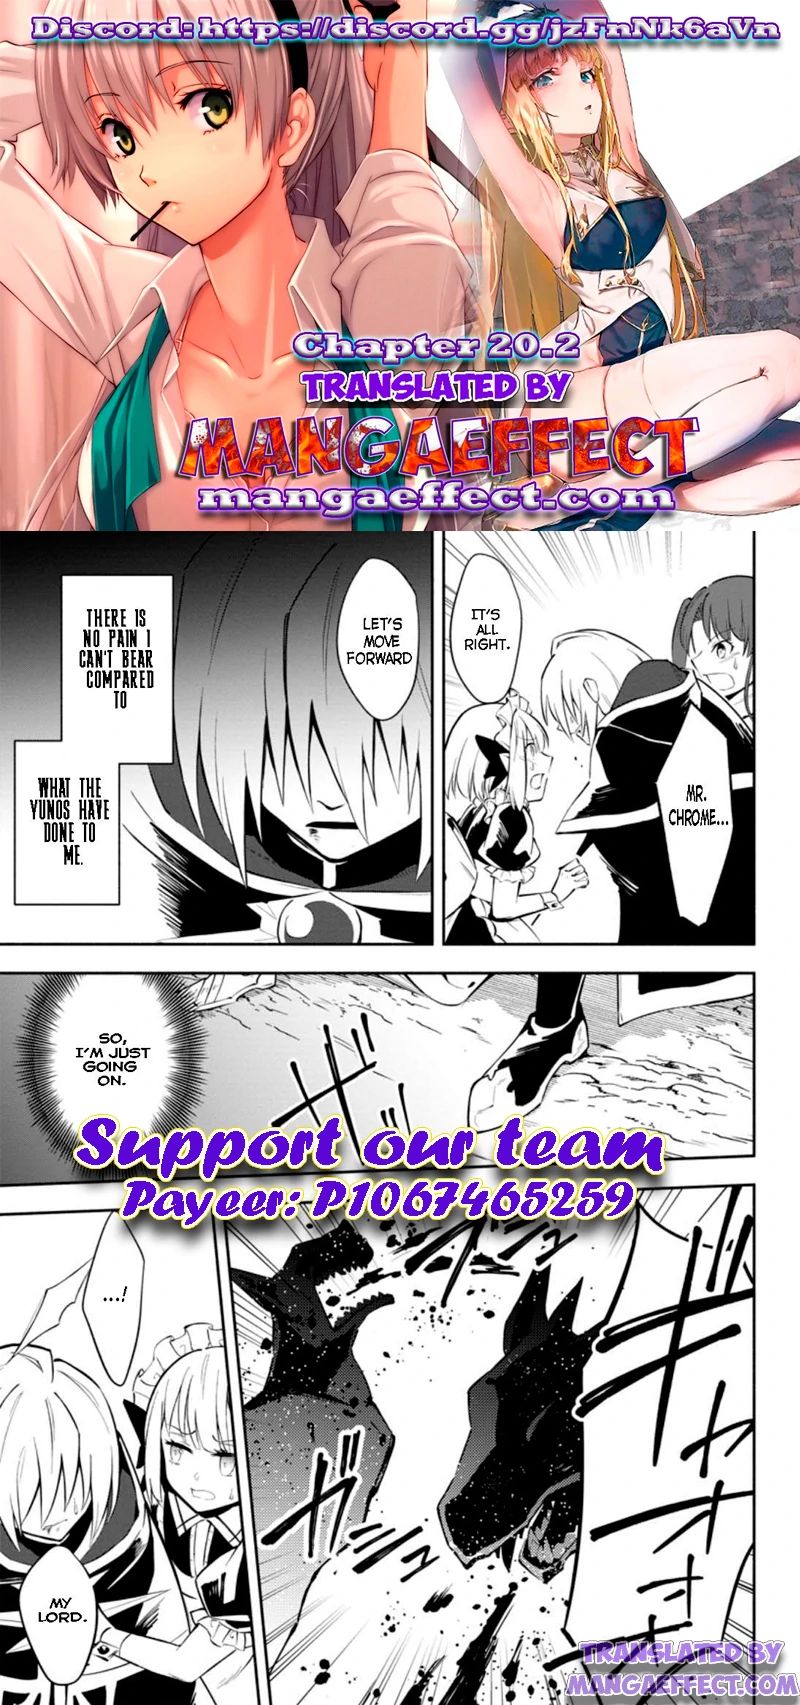 My Lover Was Stolen, And I Was Kicked Out Of The Hero’S Party, But I Awakened To The Ex Skill “Fixed Damage” And Became Invincible. Now, Let’S Begin Some Revenge - Page 1